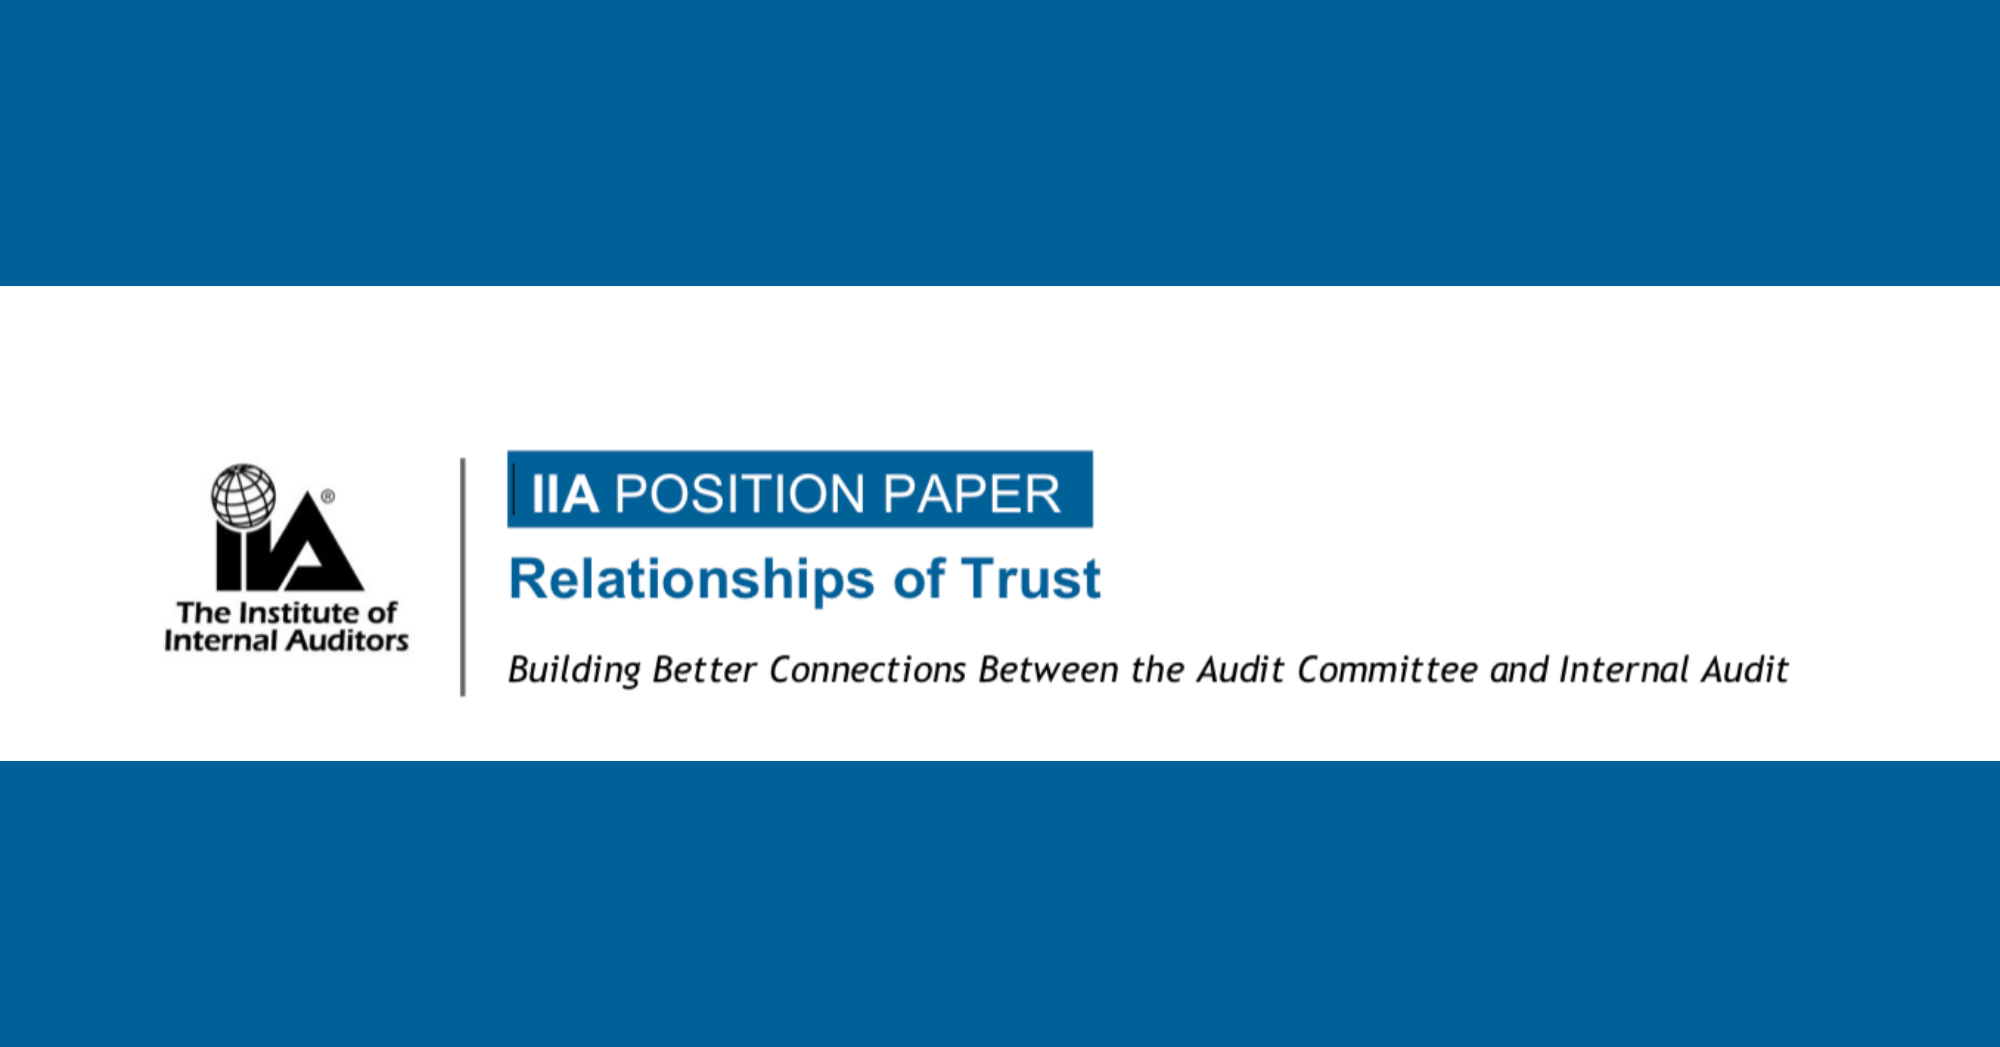 Relationship of trust, position paper by IIA